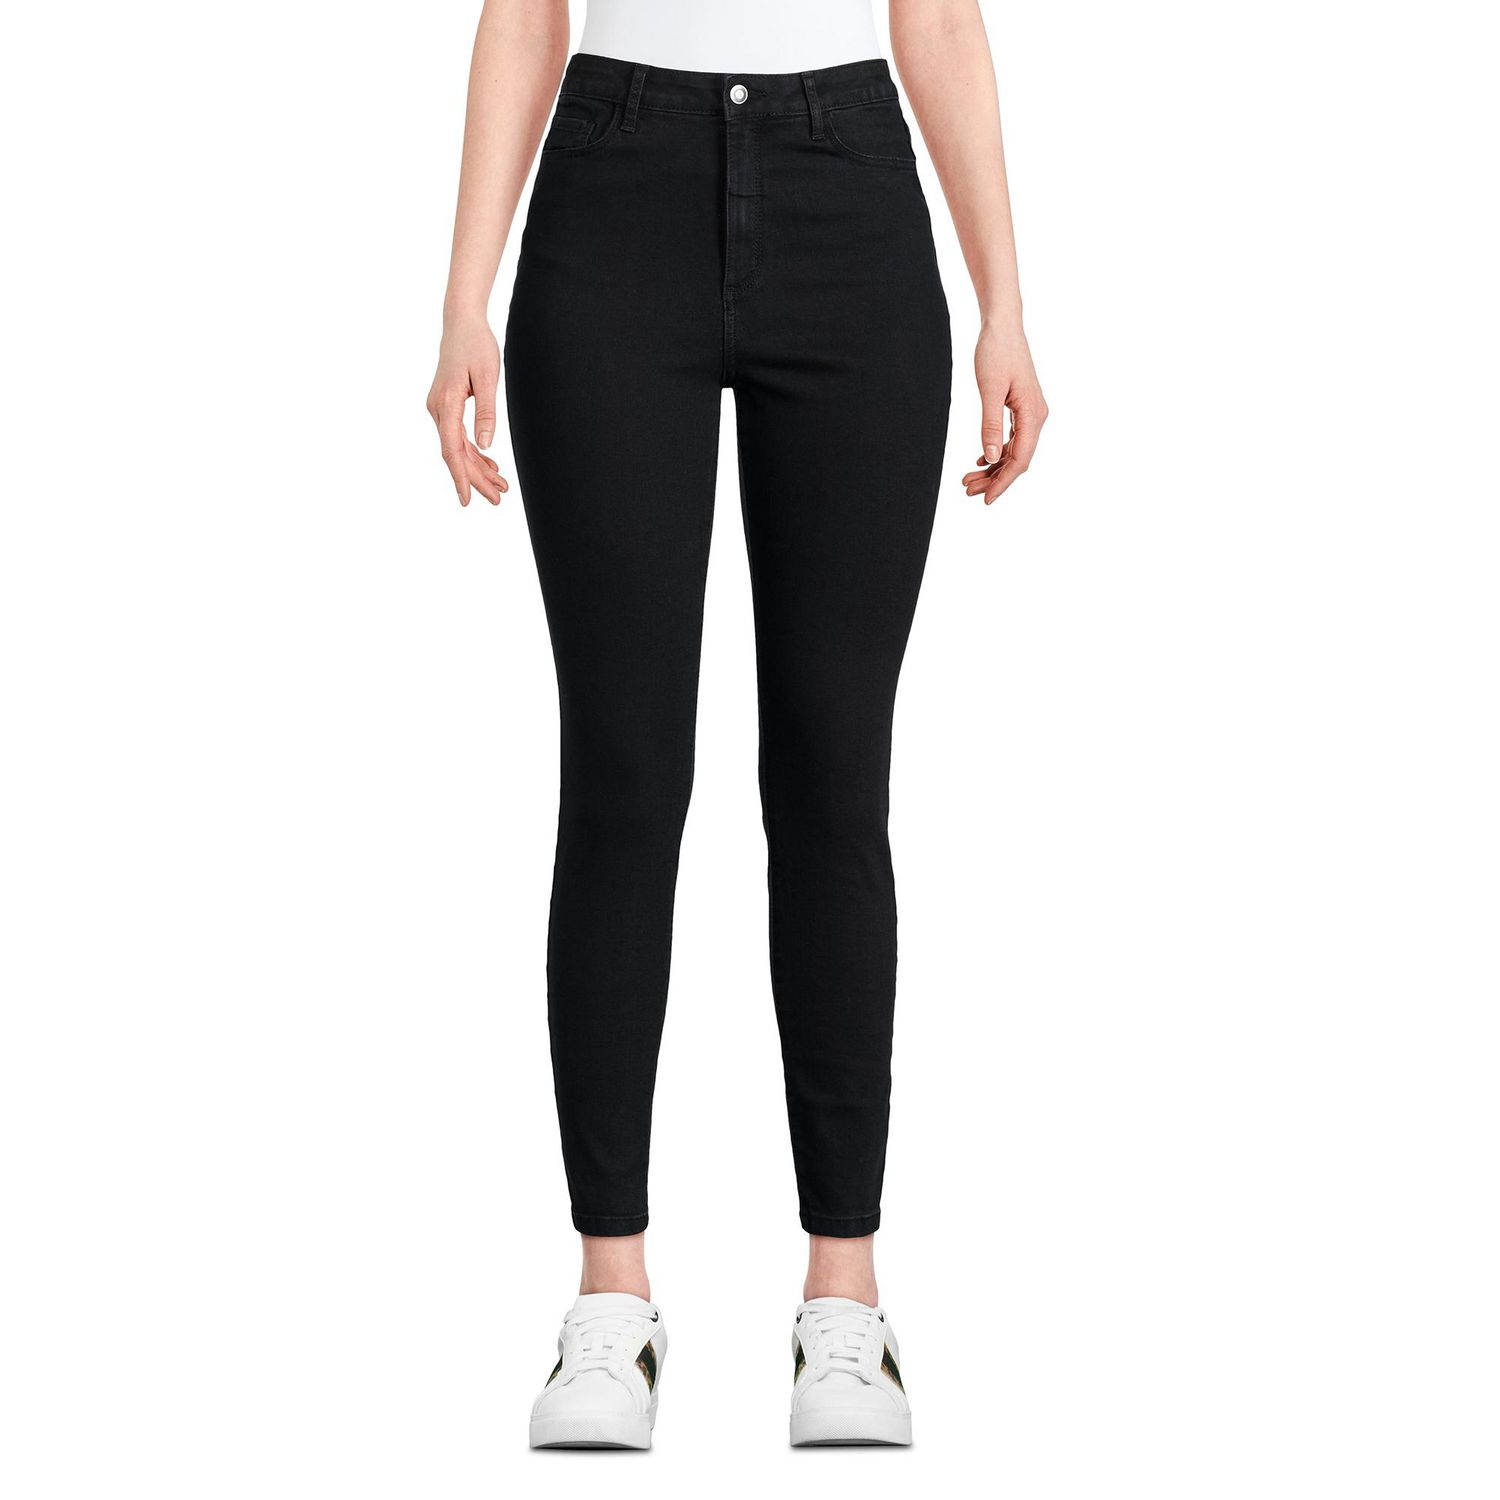 George Plus Women's Basic Fitted Legging 